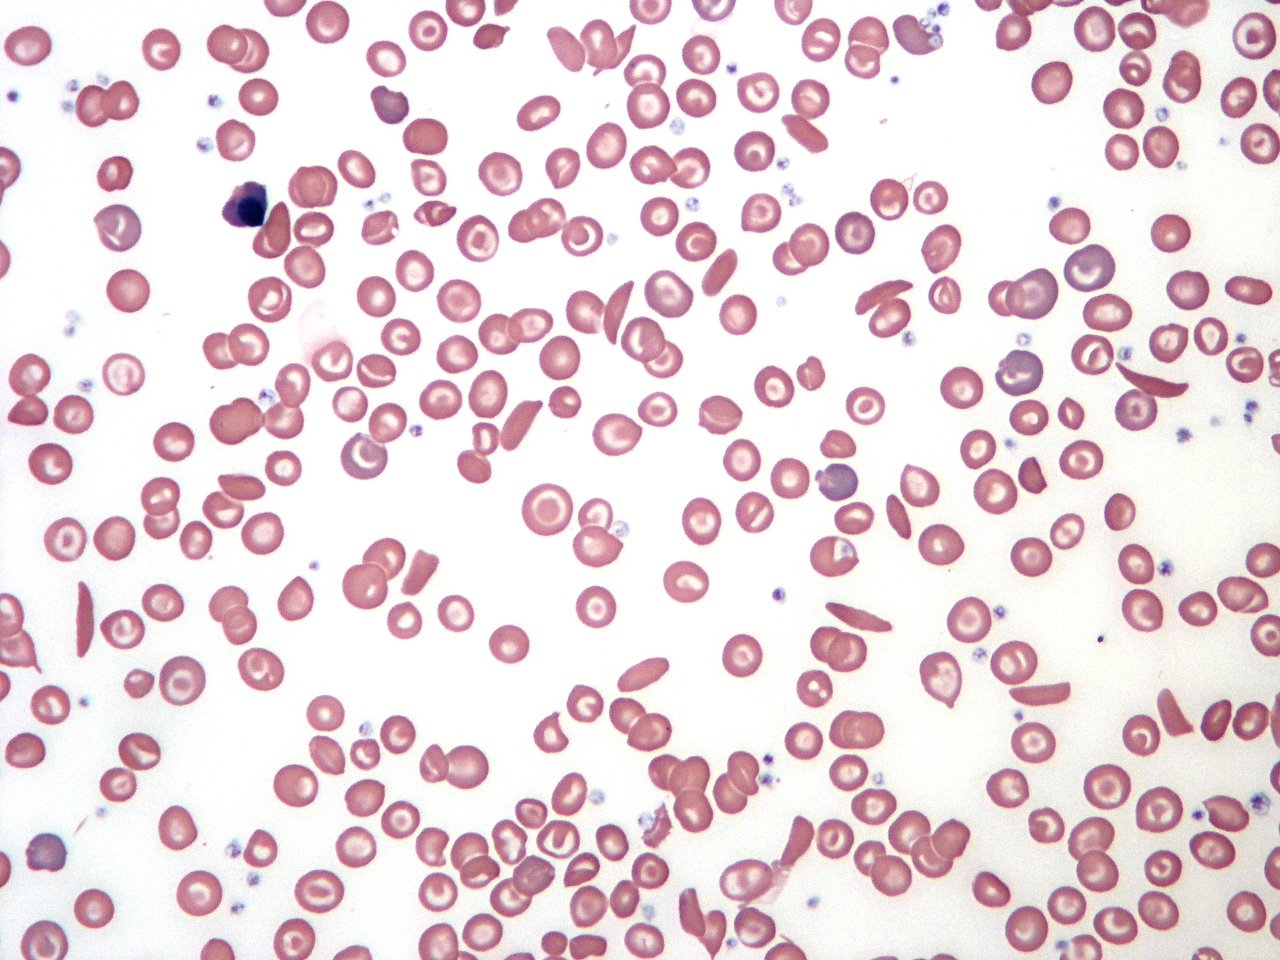 sickle cell anemia 